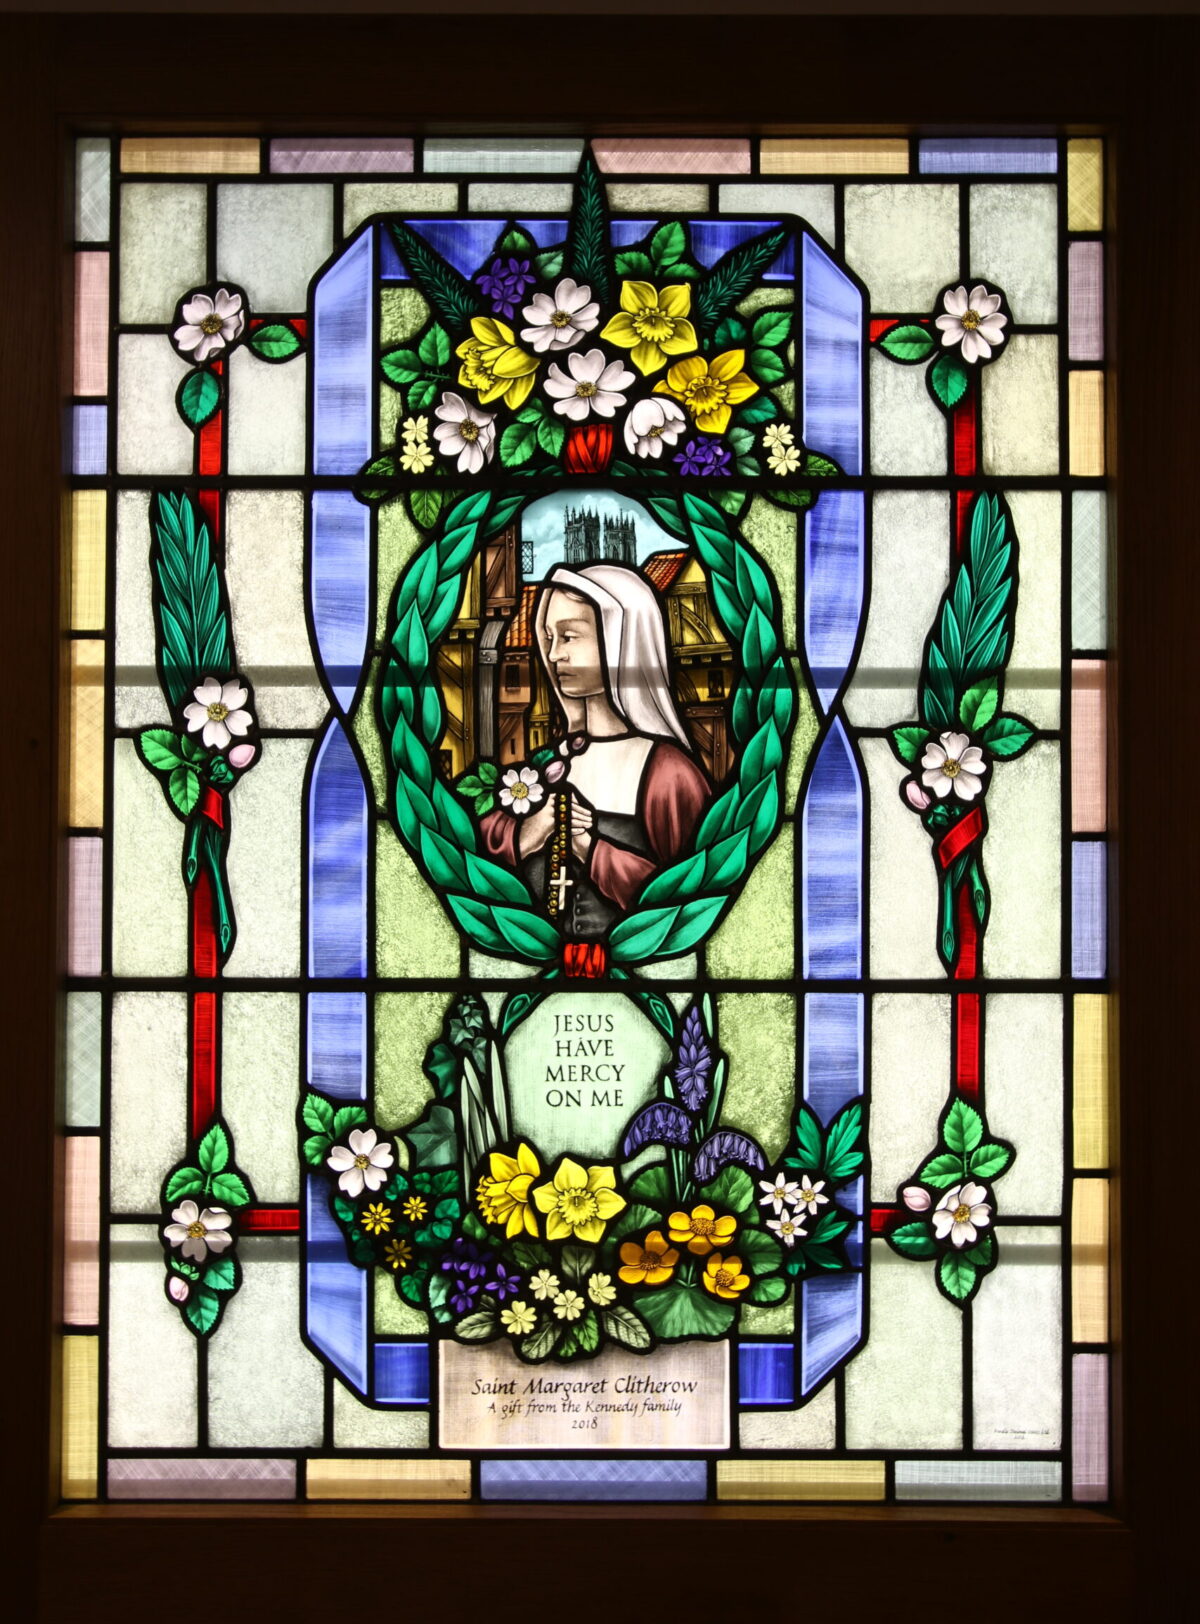 Margaret Clitheroe stained glass